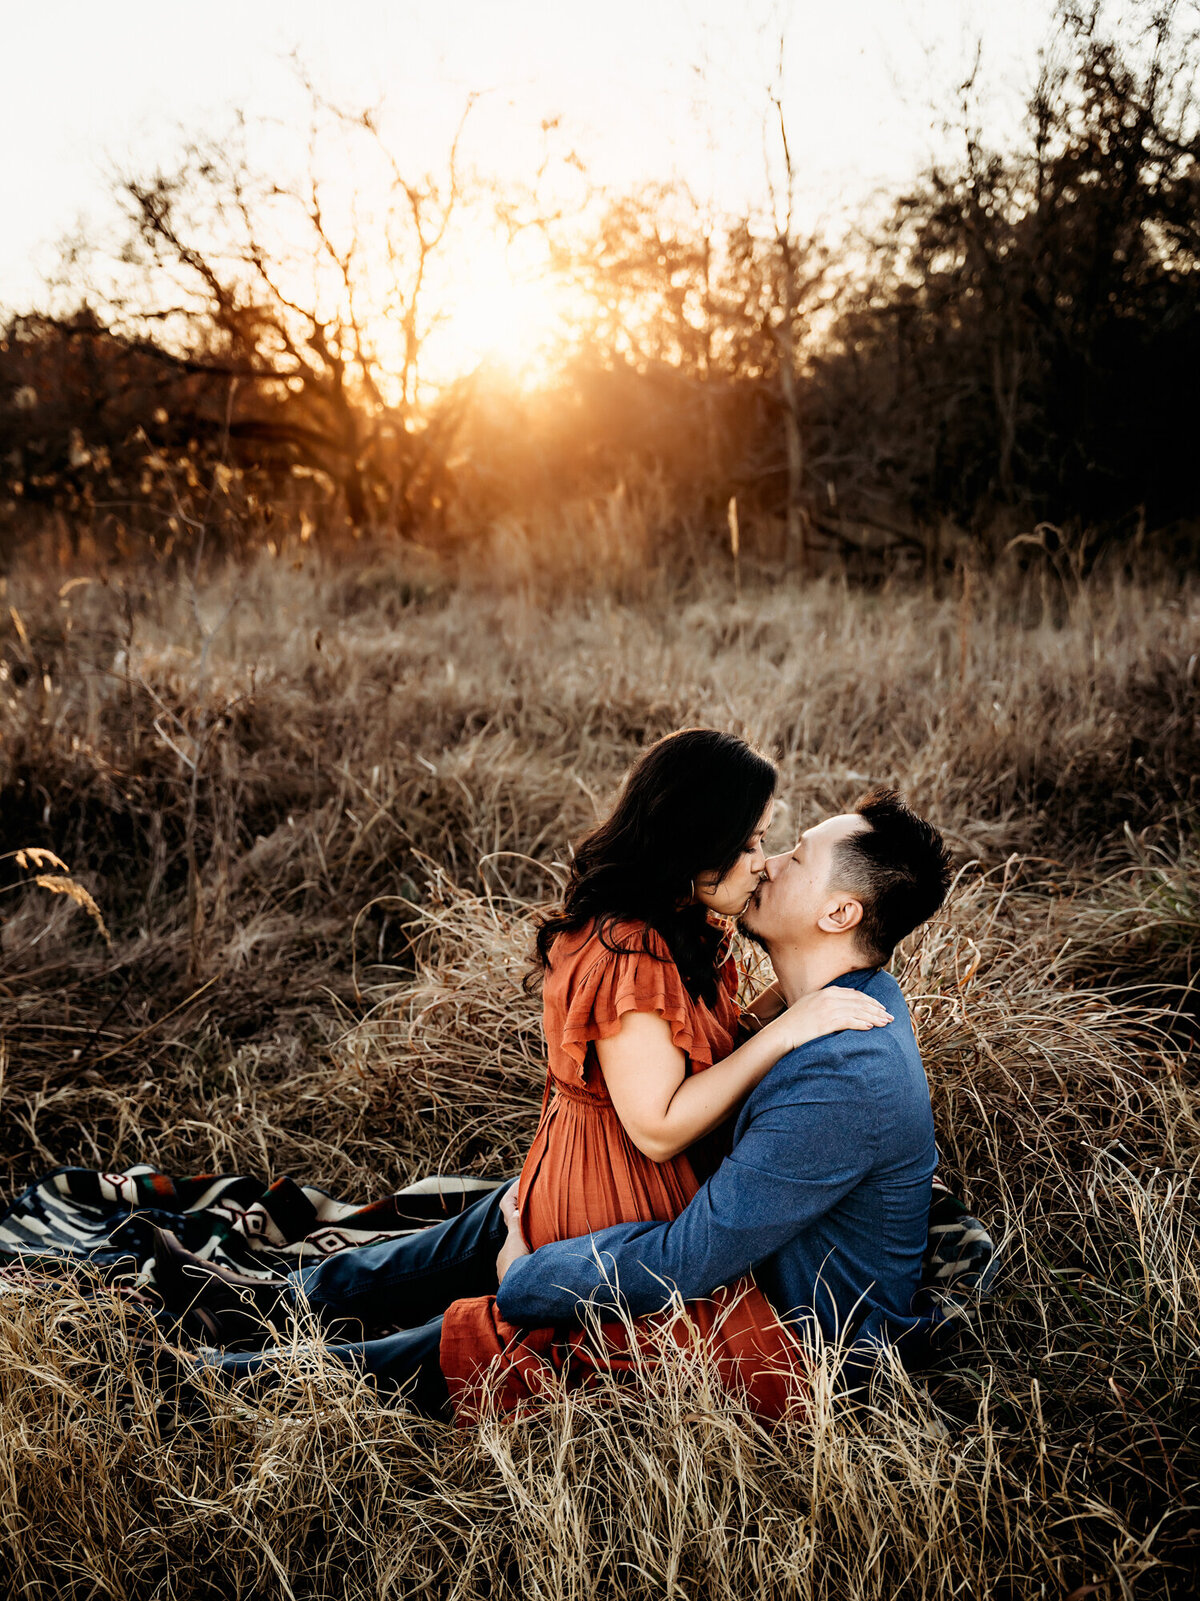 Couples Photography, Woman in a rust dress straddling man in a blue suit and kissing him, in the field at sunset on a blanket.